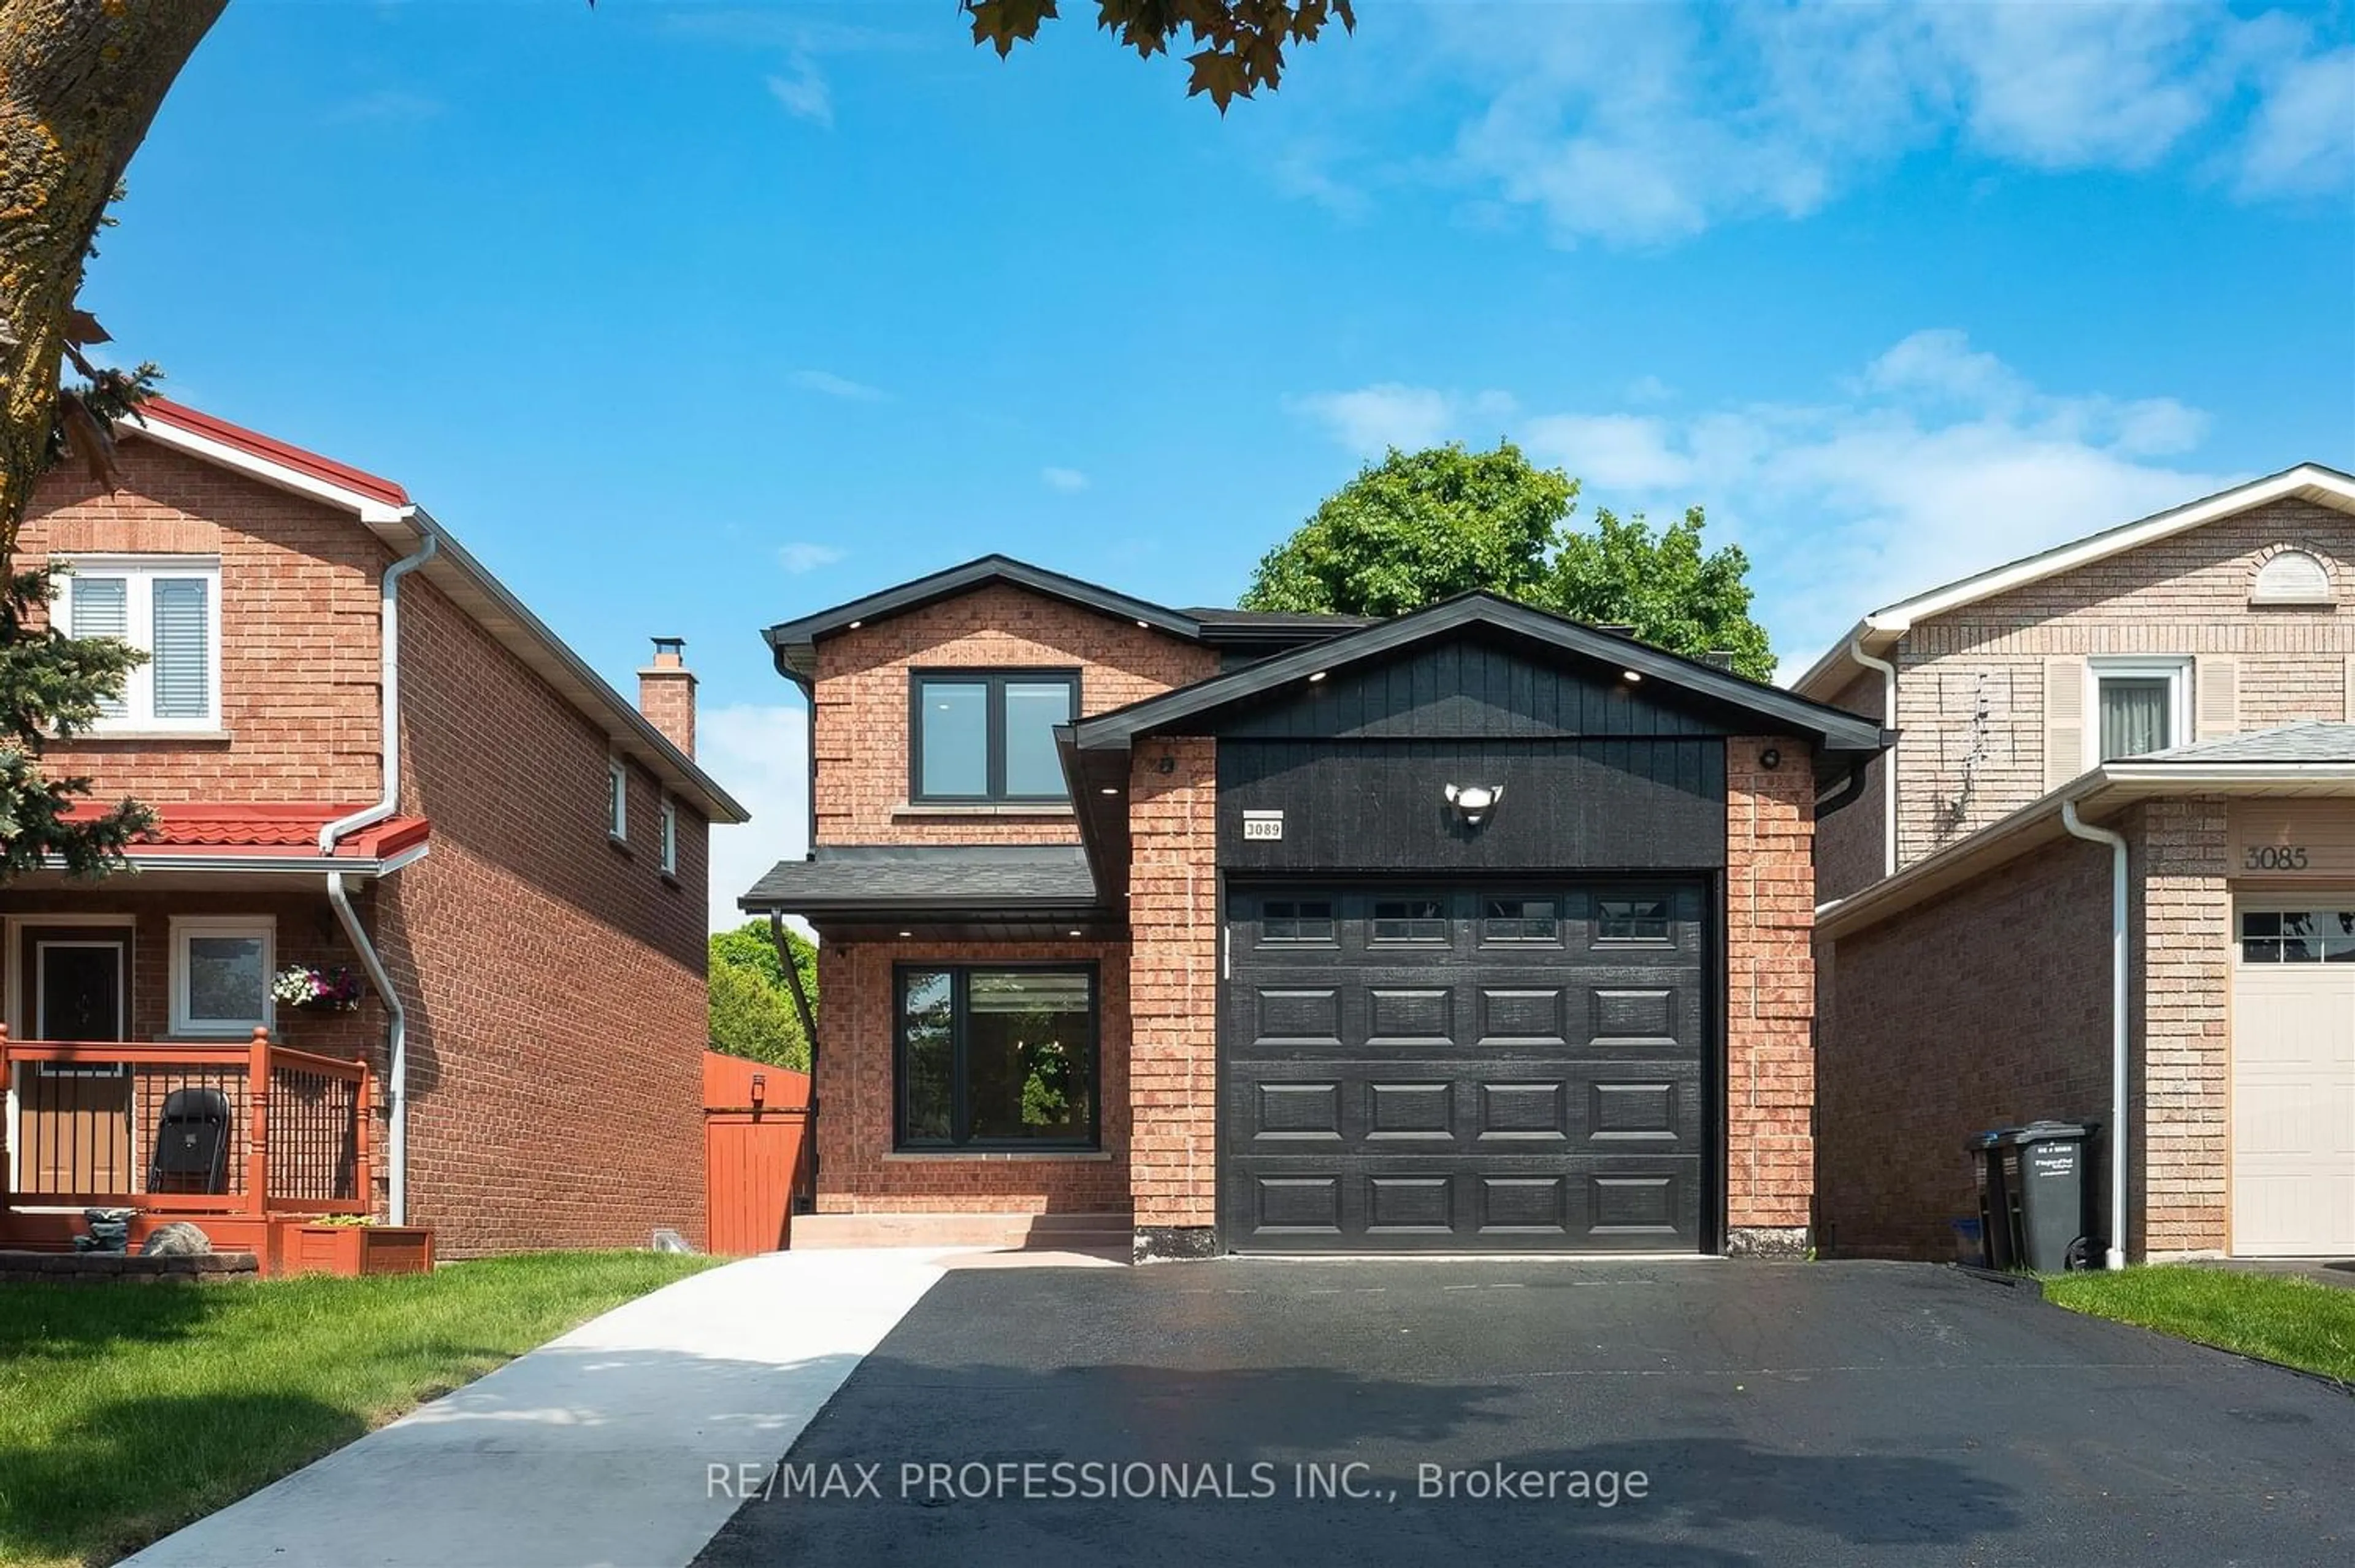 Home with brick exterior material for 3089 Olympus Mews, Mississauga Ontario L5N 4V8